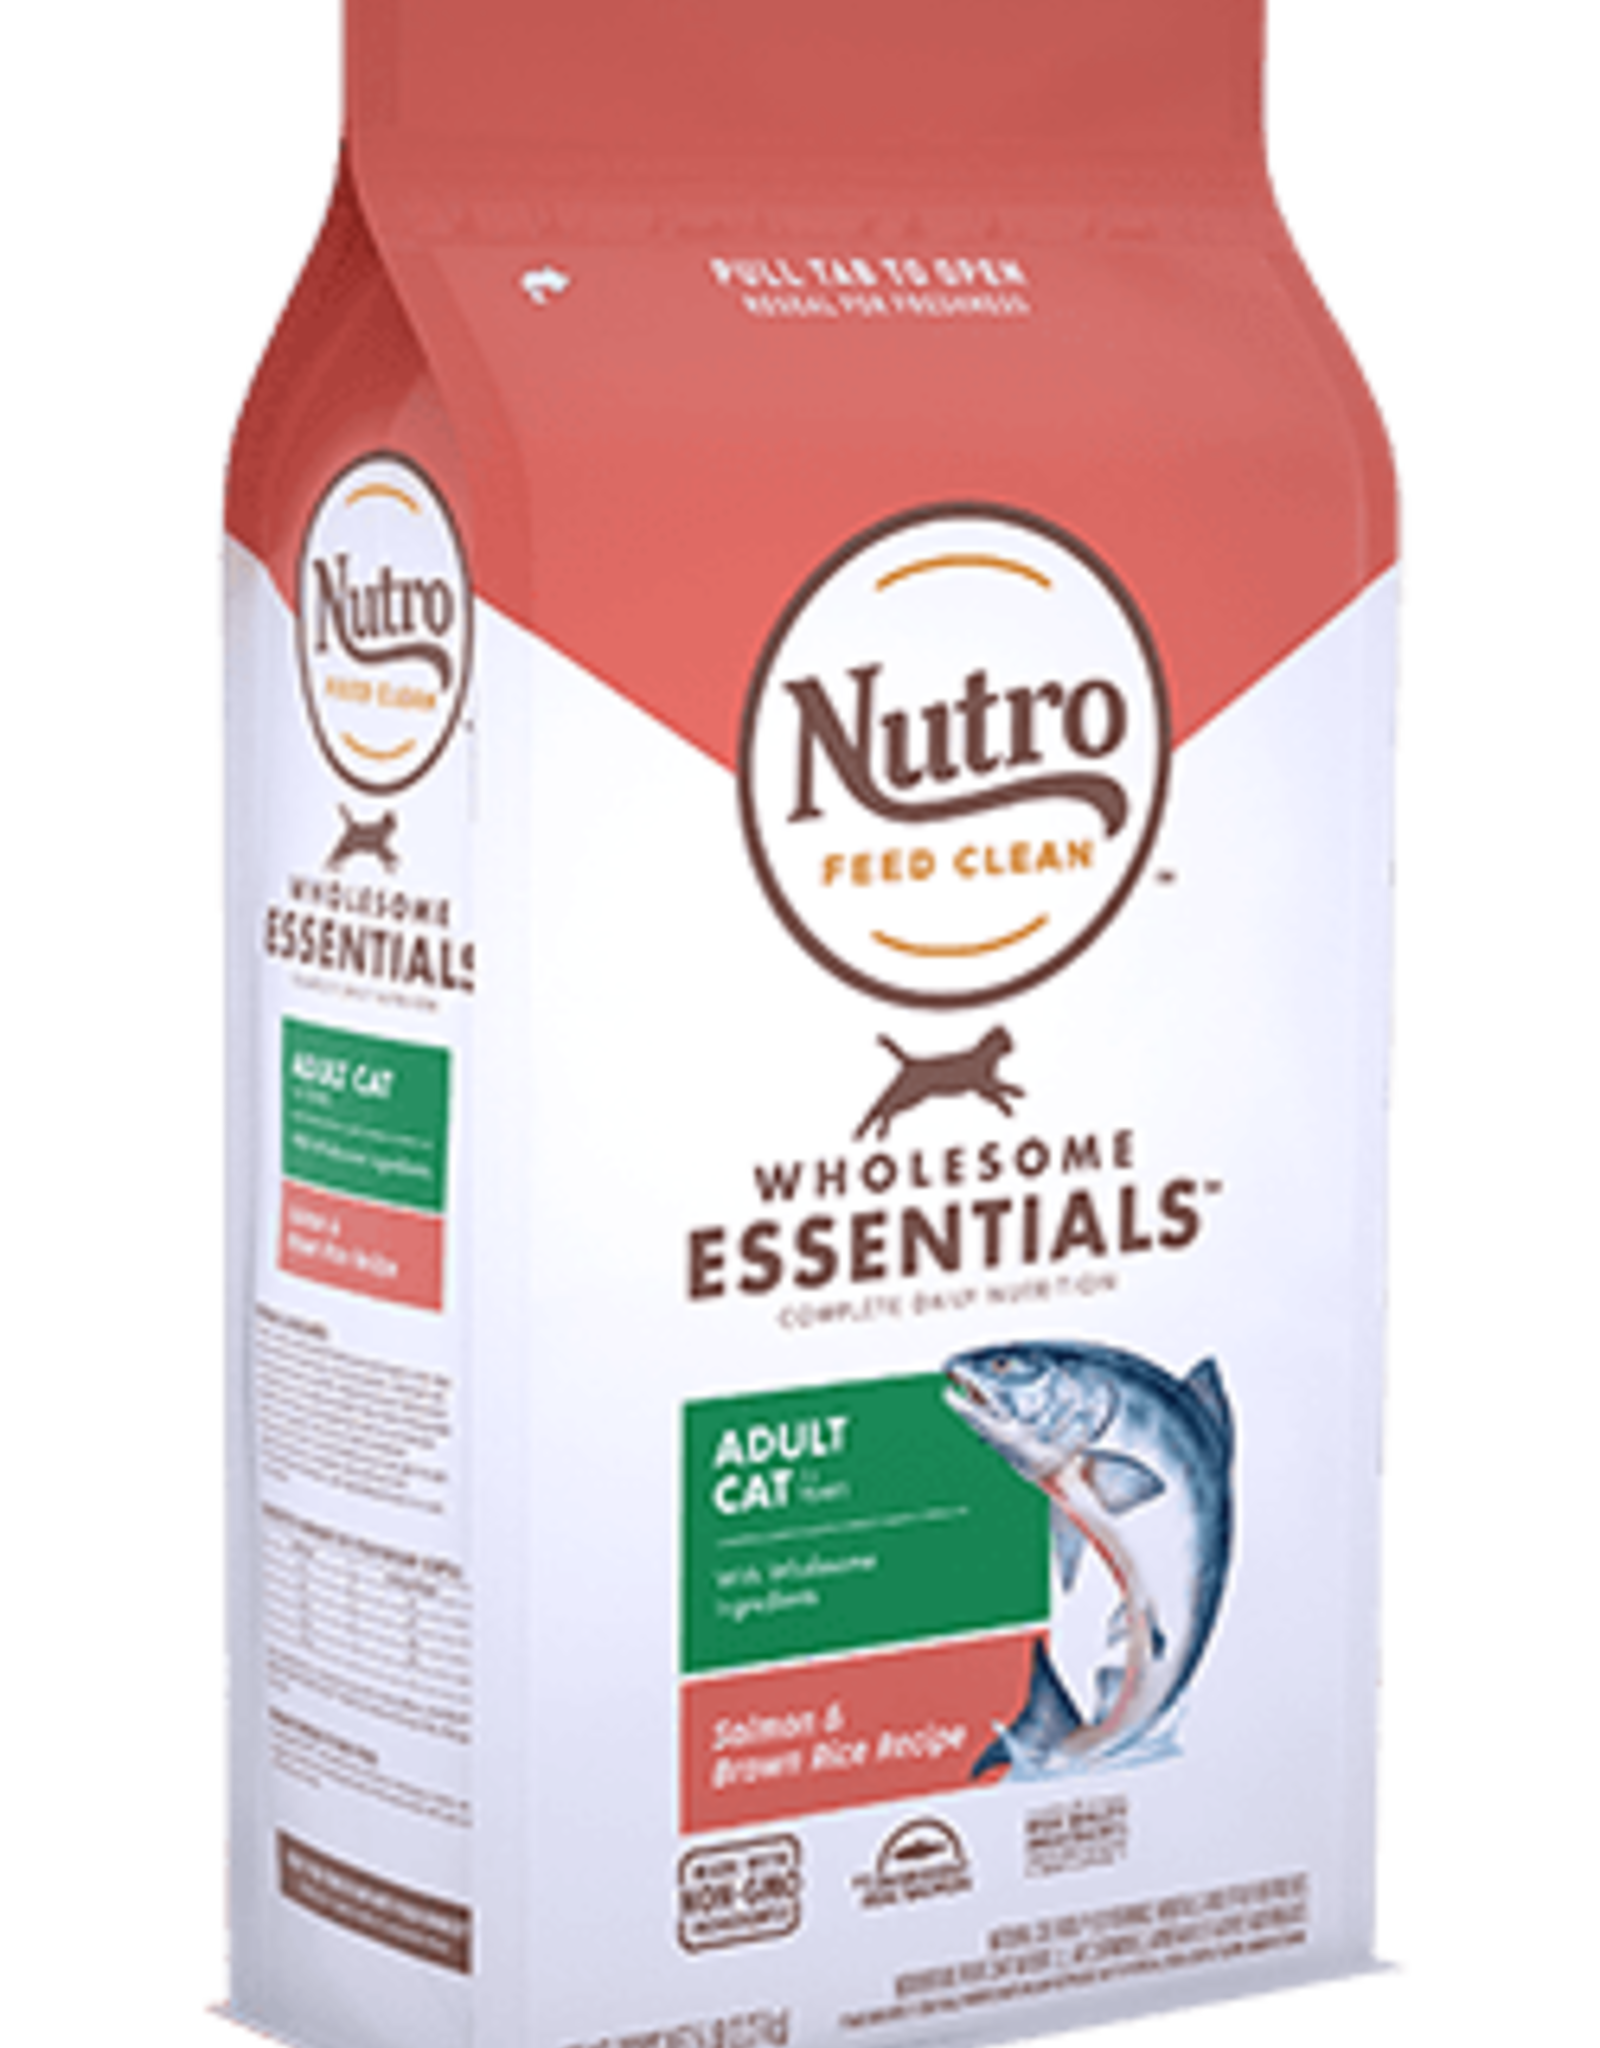 NUTRO PRODUCTS  INC. NUTRO CAT WHOLESOME ESSENTIALS SALMON & RICE 14LBS